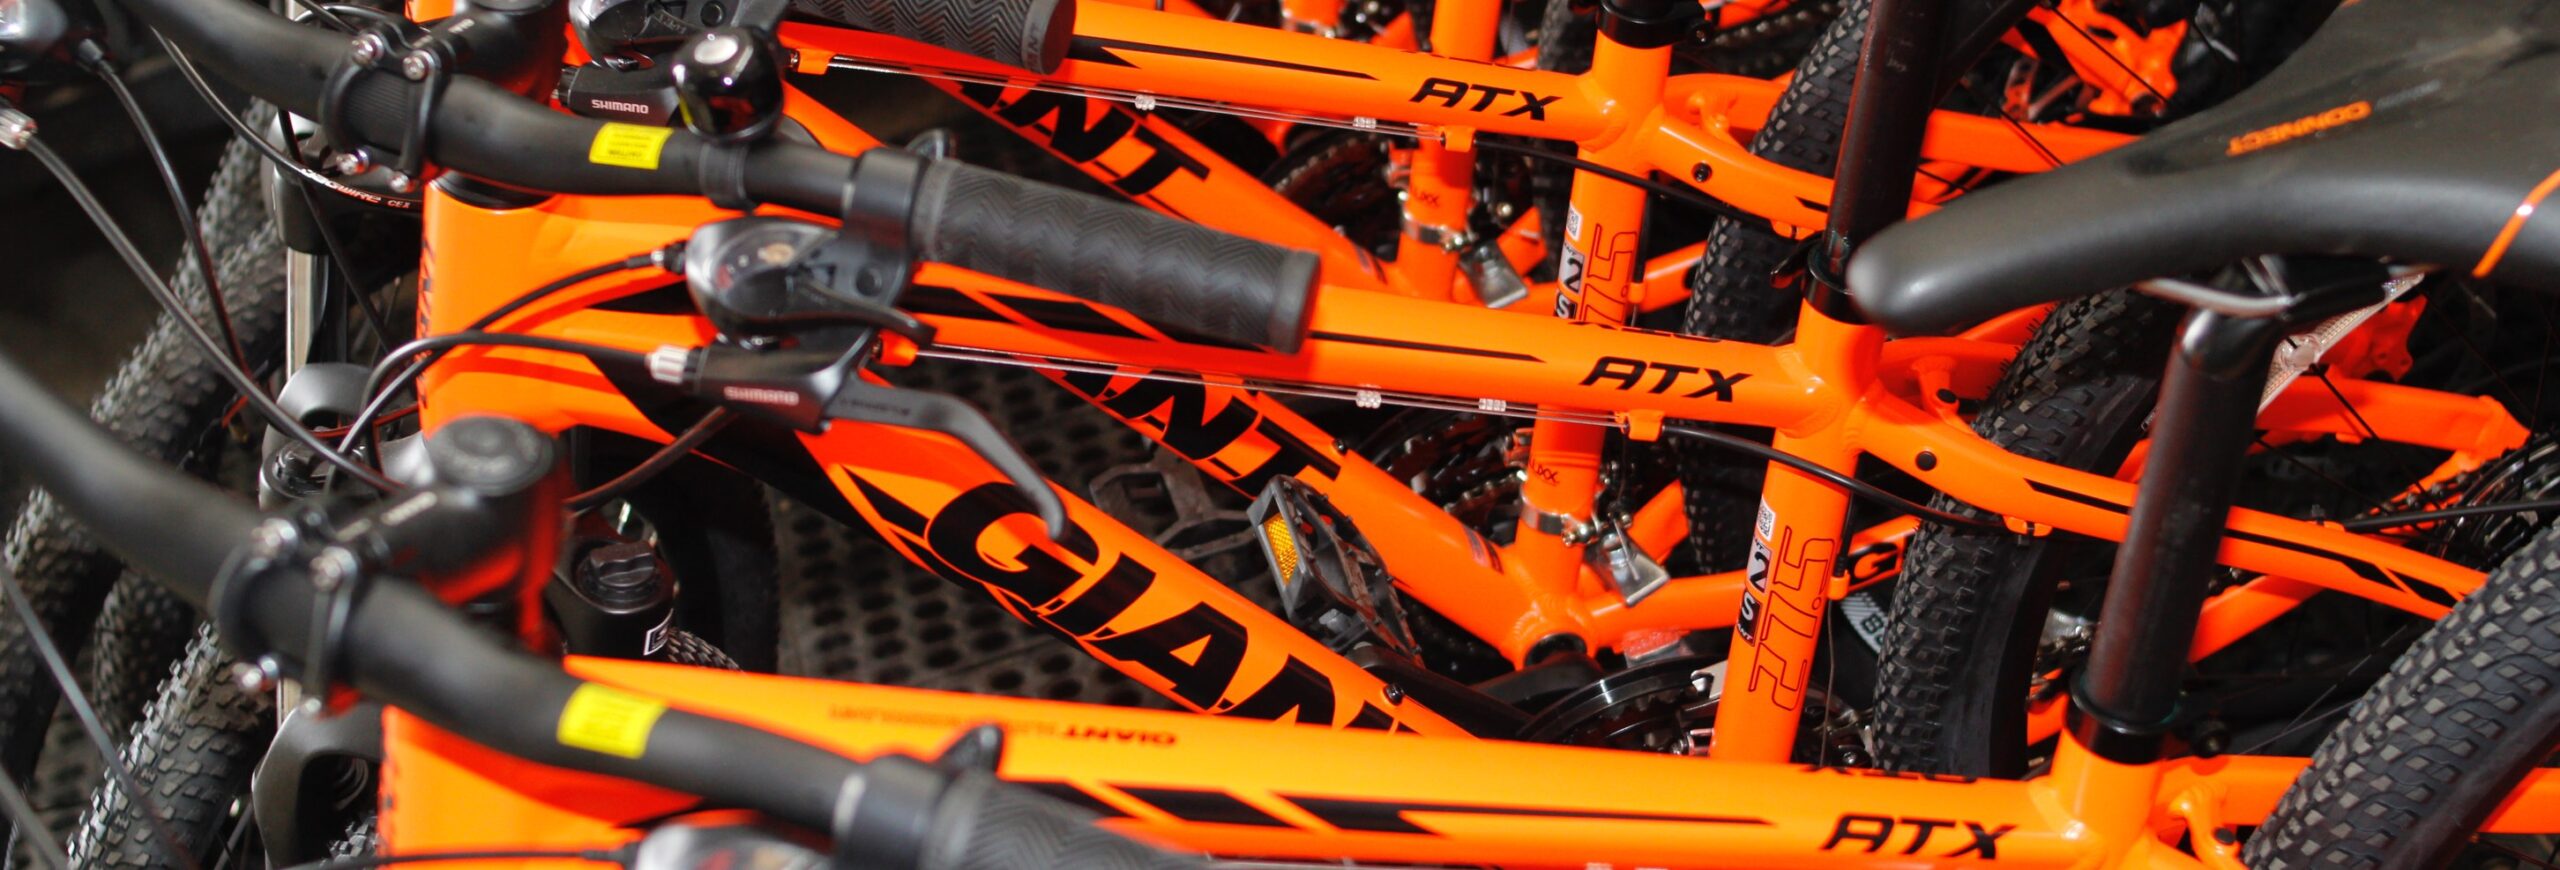 This close-up image captures a stack of vibrant orange Giant bikes, arranged closely together. The bold color of the bikes creates a visually striking and dynamic composition, emphasizing the unity of the neatly arranged two-wheelers.